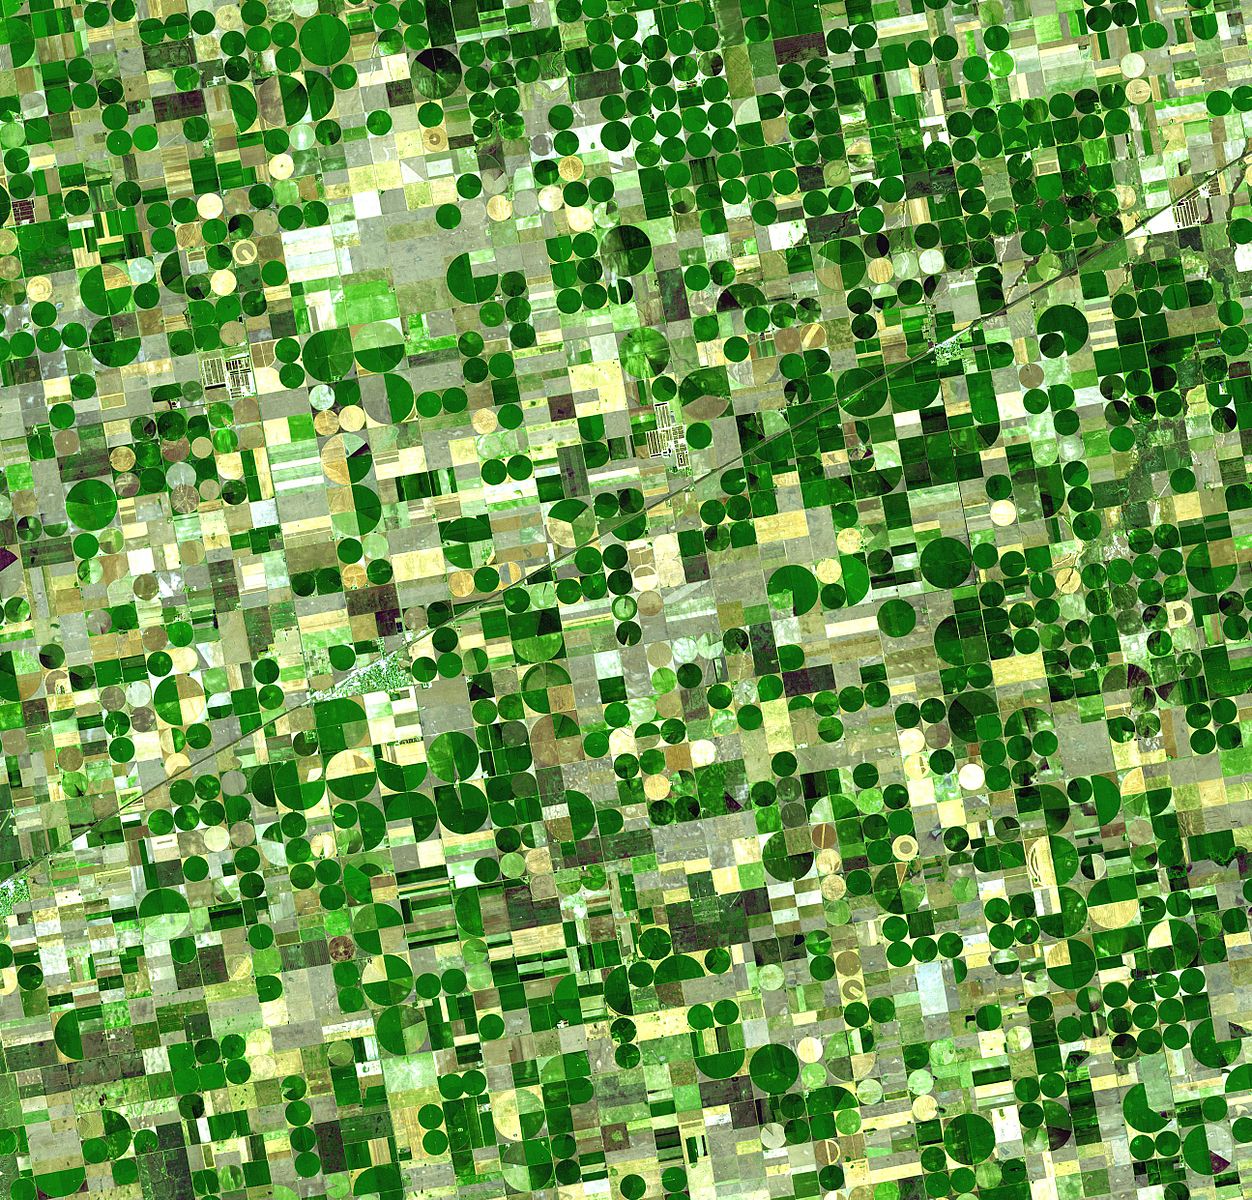 Satellite image of crops growing in Kansas, United States. Healthy, growing crops are green.